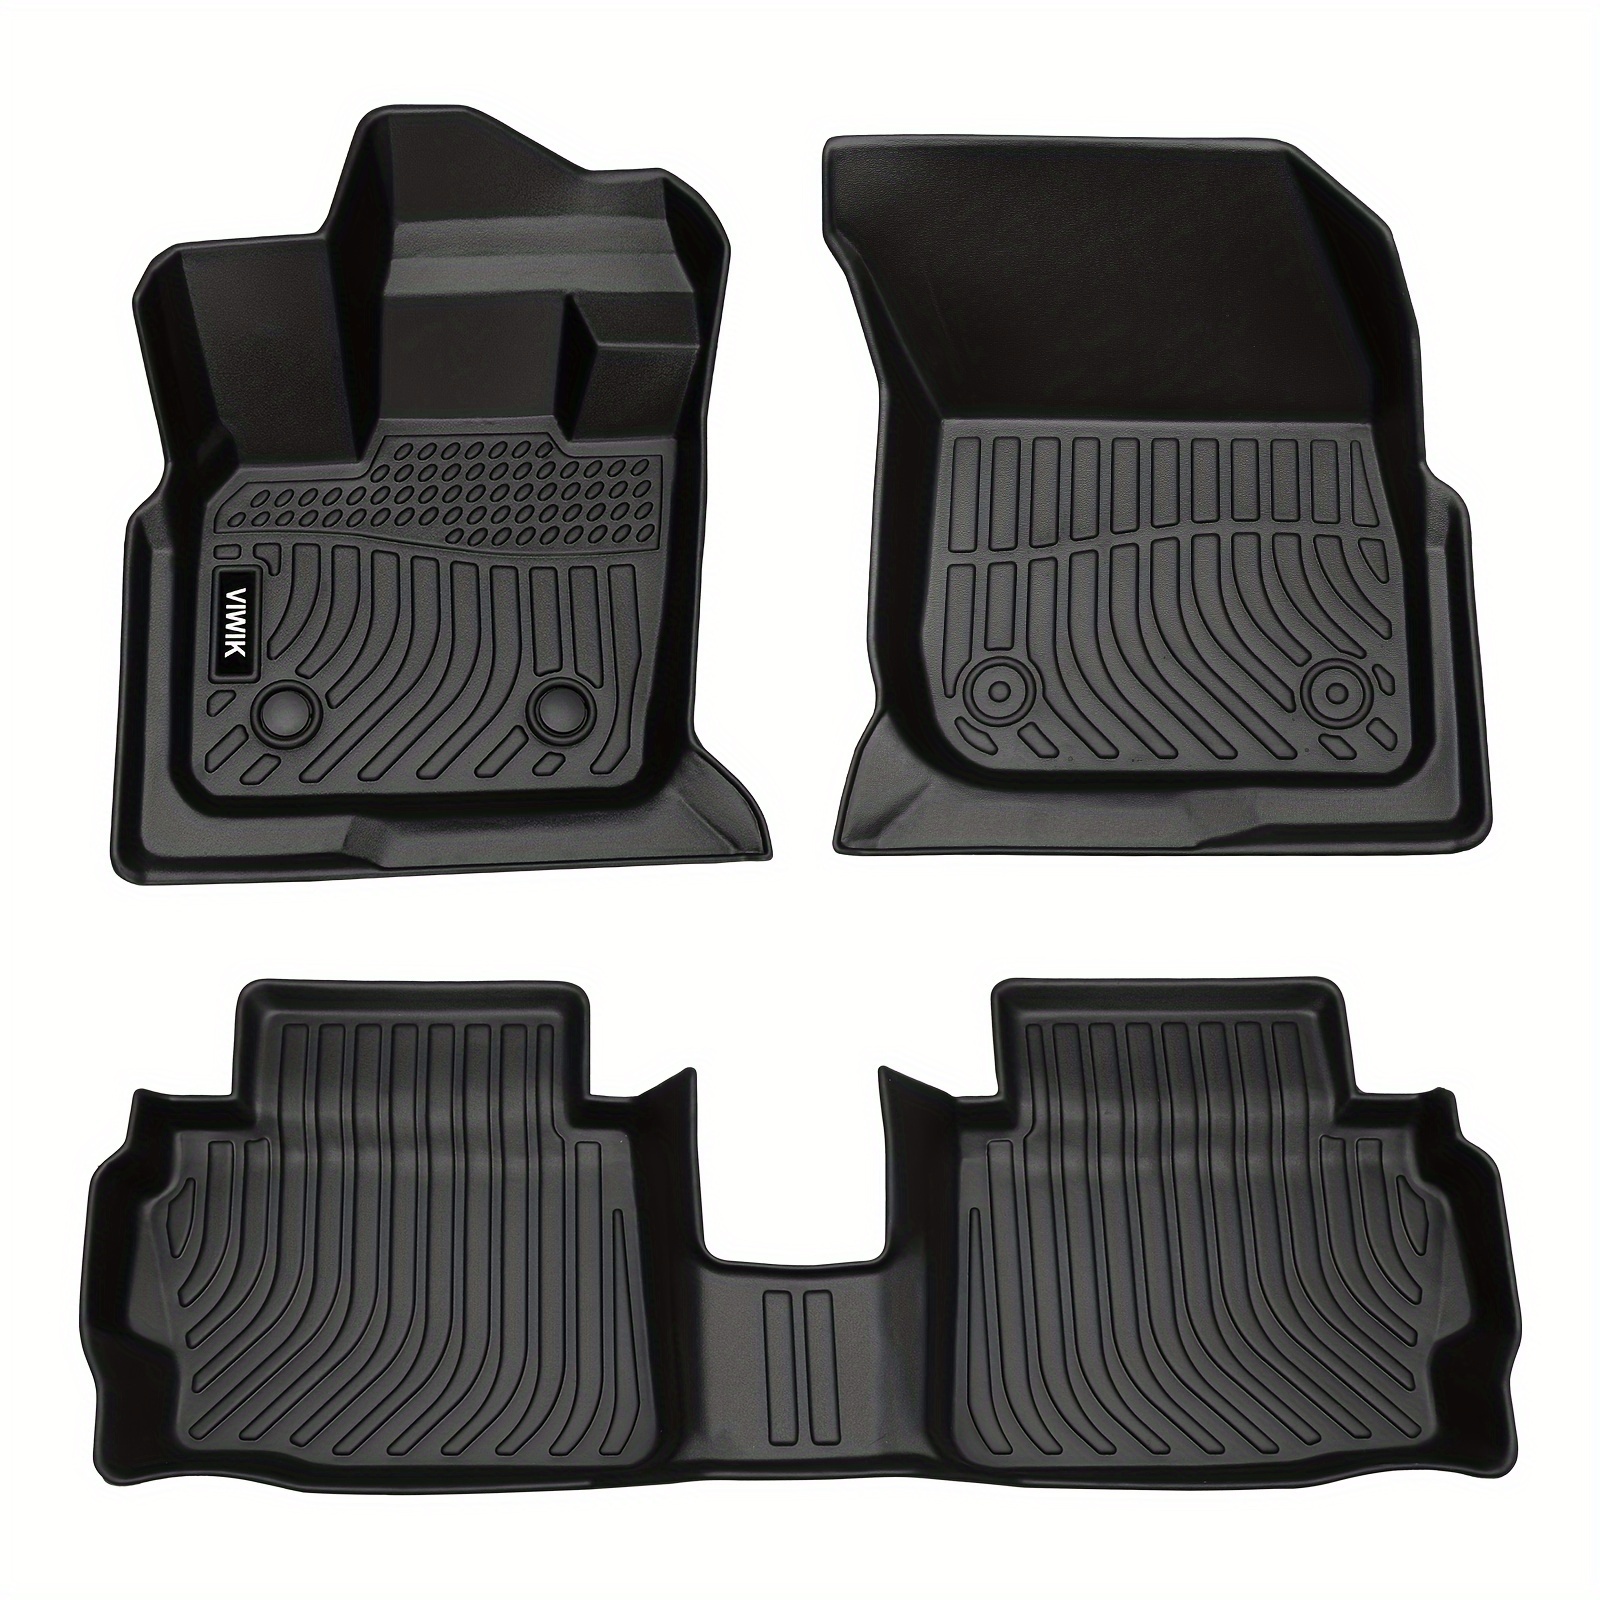 

Floor Mats For Ford Fusion 2017-2020/2017-2020 Mkz, Car Mats All Weather Protection Custom Floor Liners For 2017-2020 Fusion/mkz Front & Rear